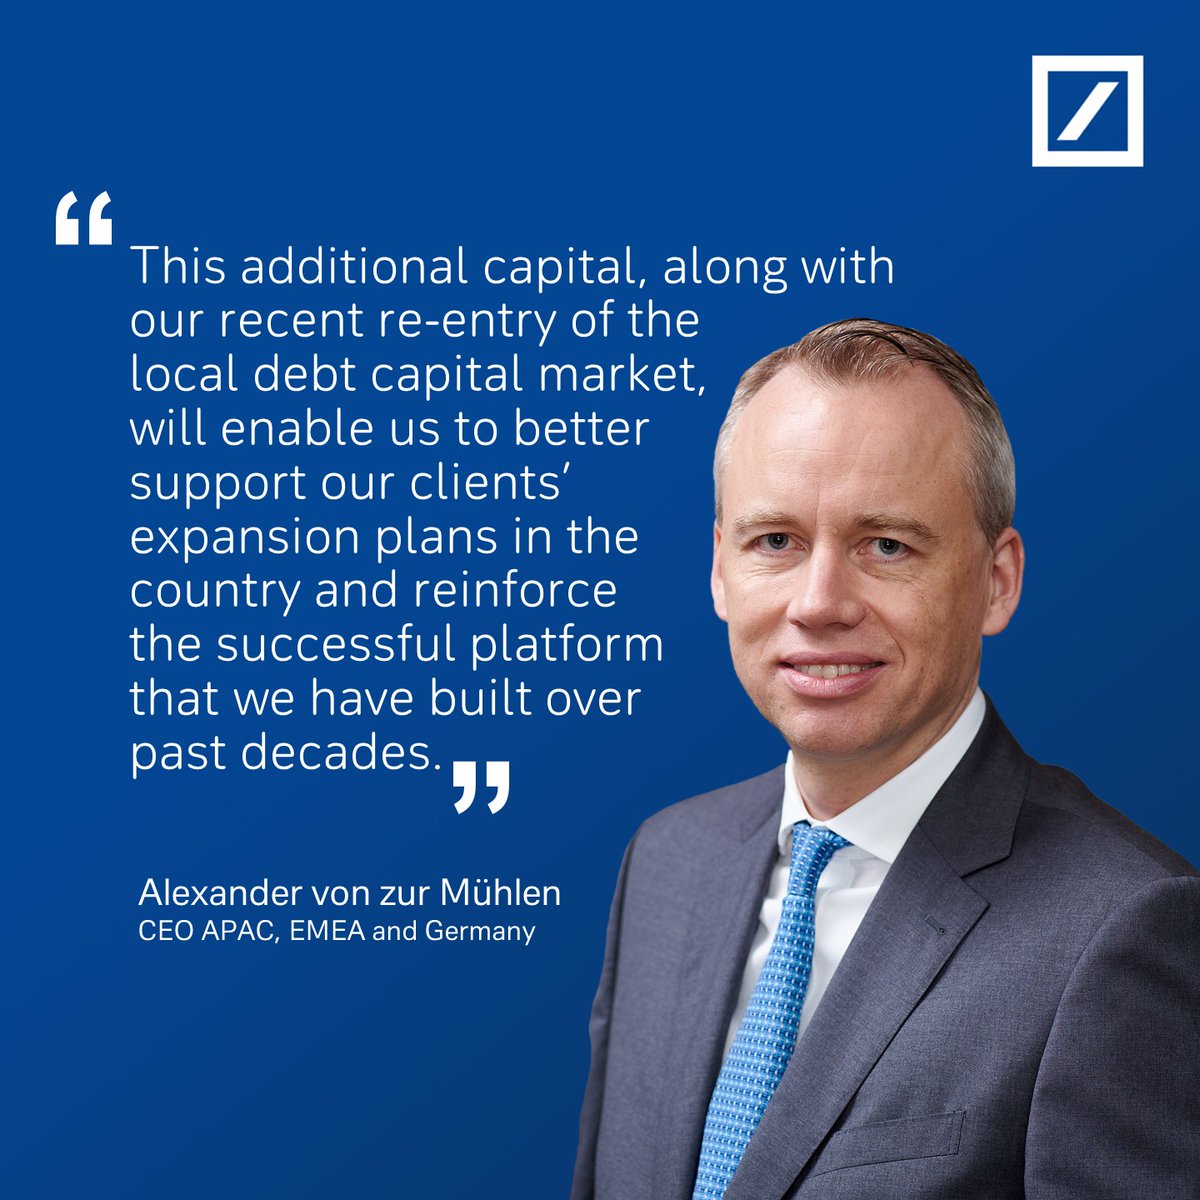 Deutsche Bank strengthens commitment to South Korea, increasing capital allocation by eur 150 million, to support growth and do more for clients. Find out more: db.com/news/detail/20…